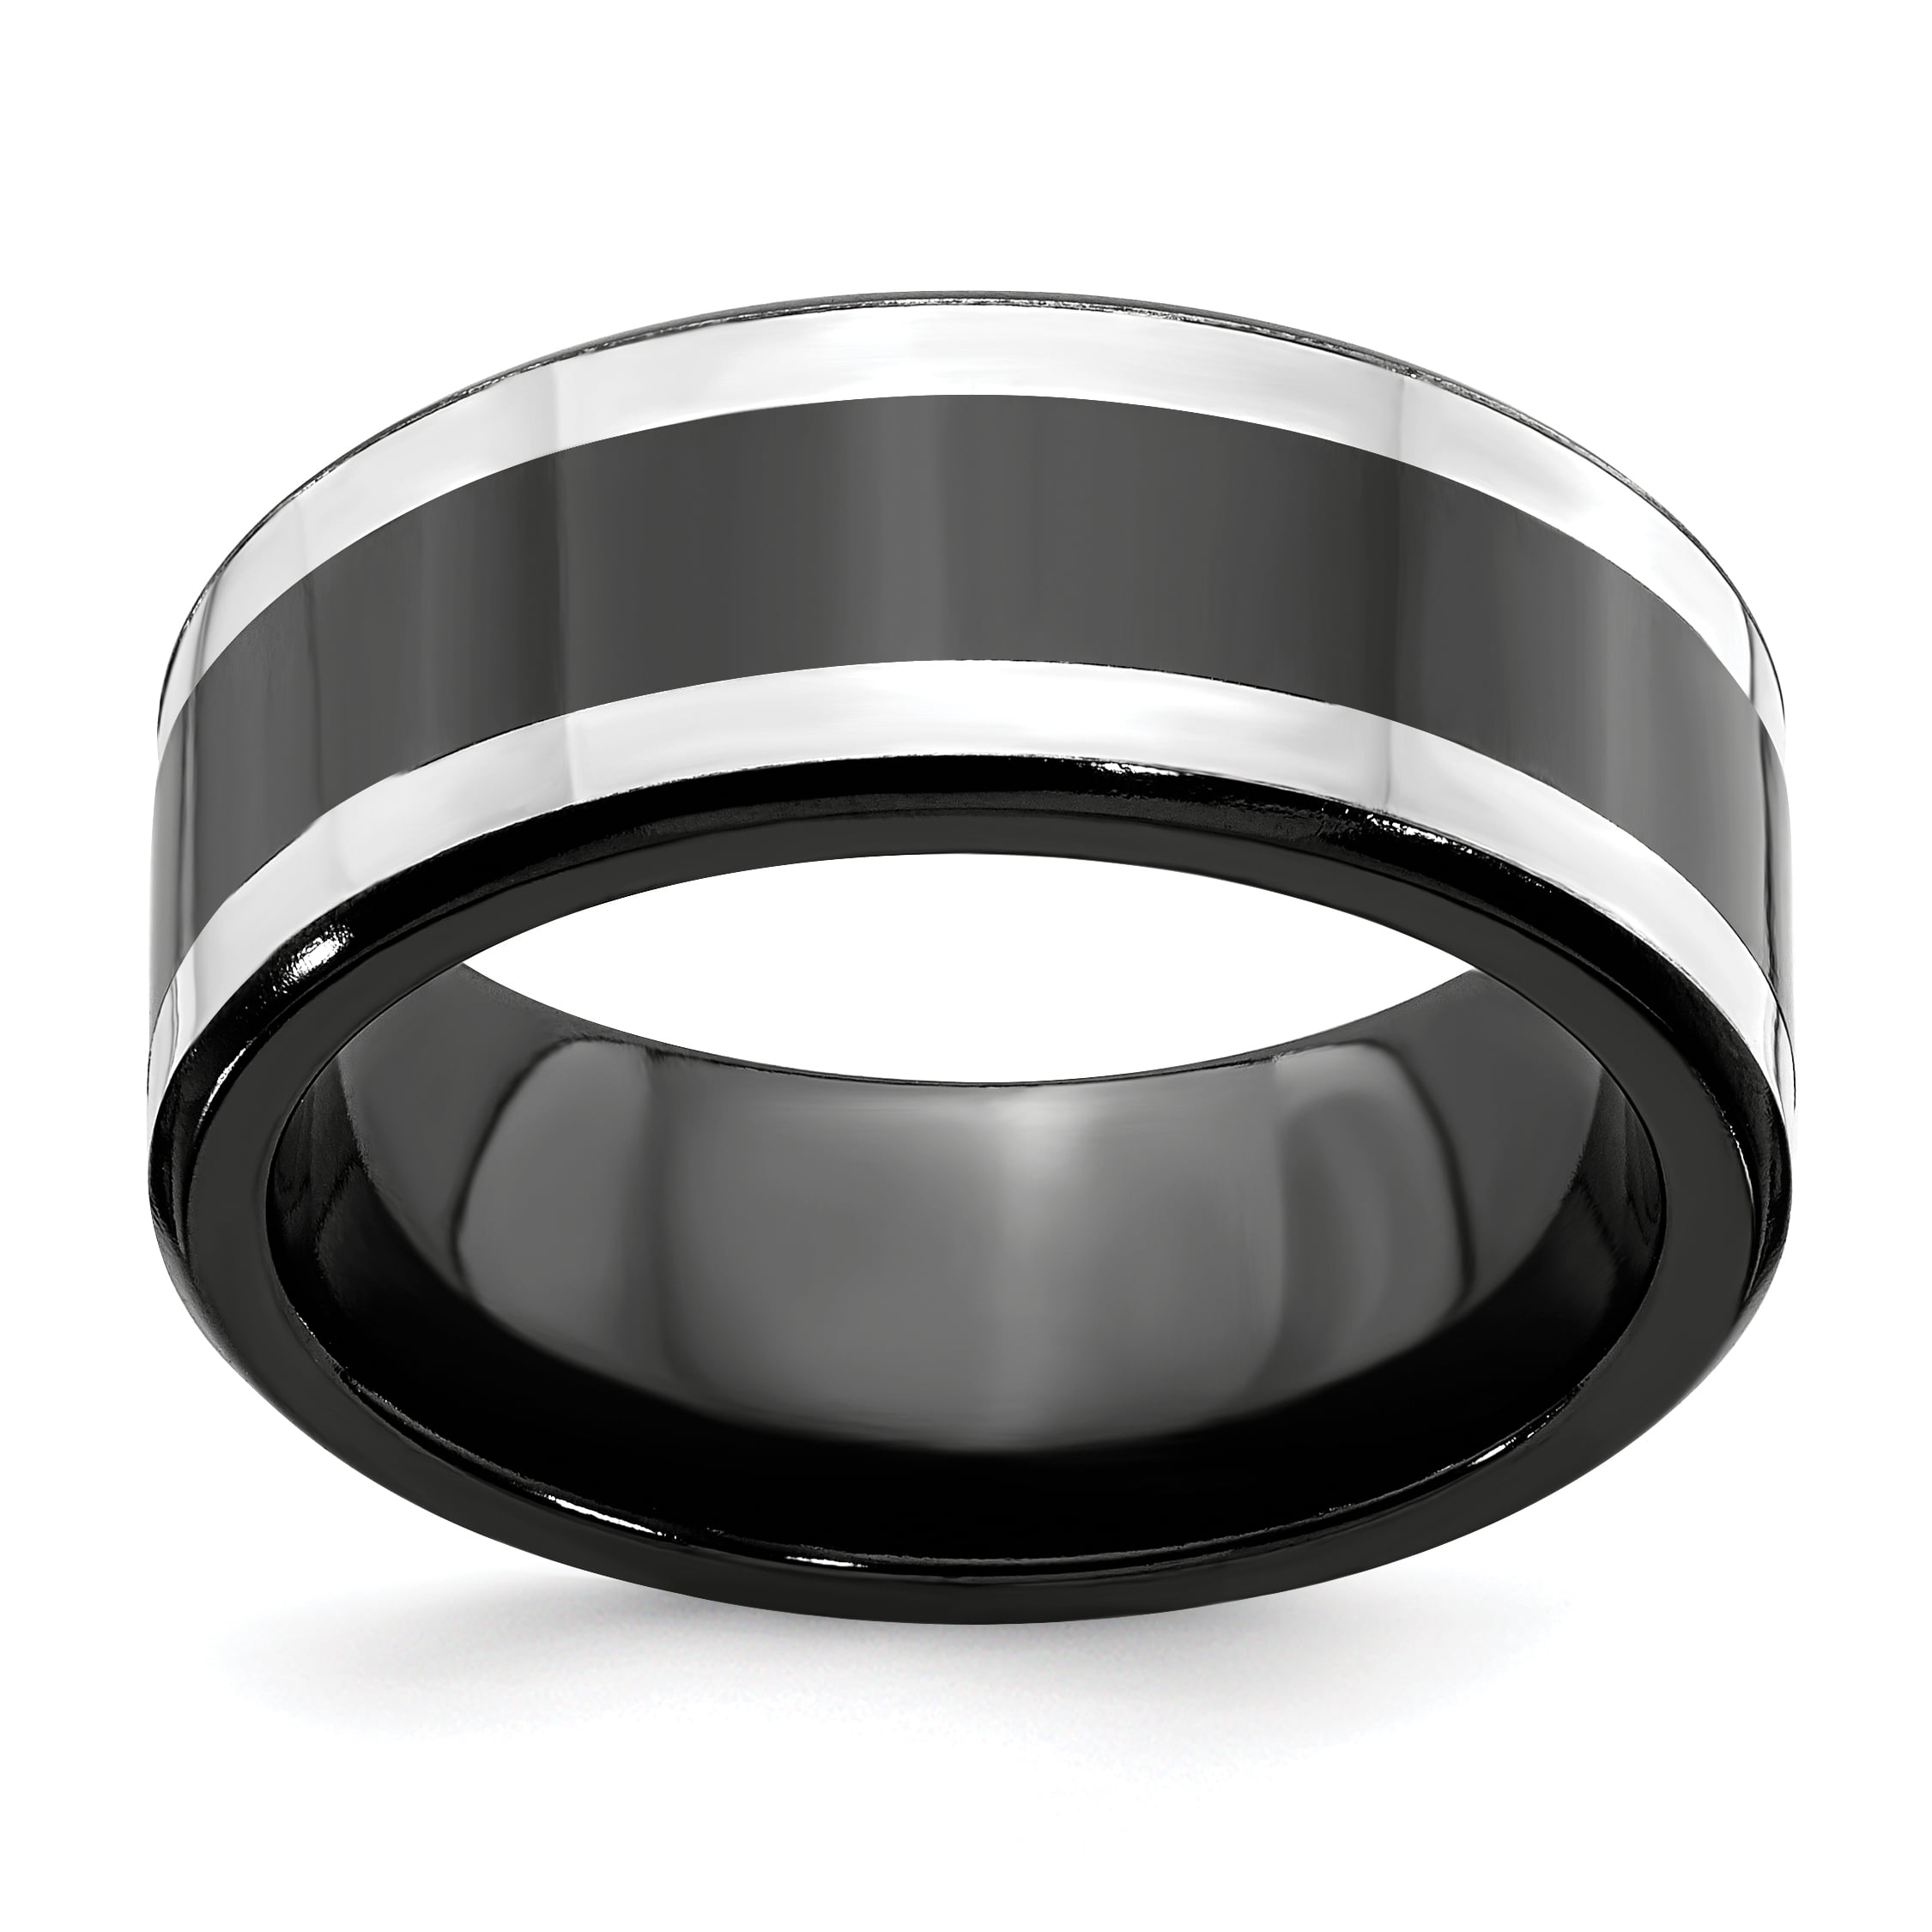 Titanium 9mm Black Plated Carbon Fiber Inlay Wedding Ring Band Type of Fashion Jewelry for Women Gifts for Her 